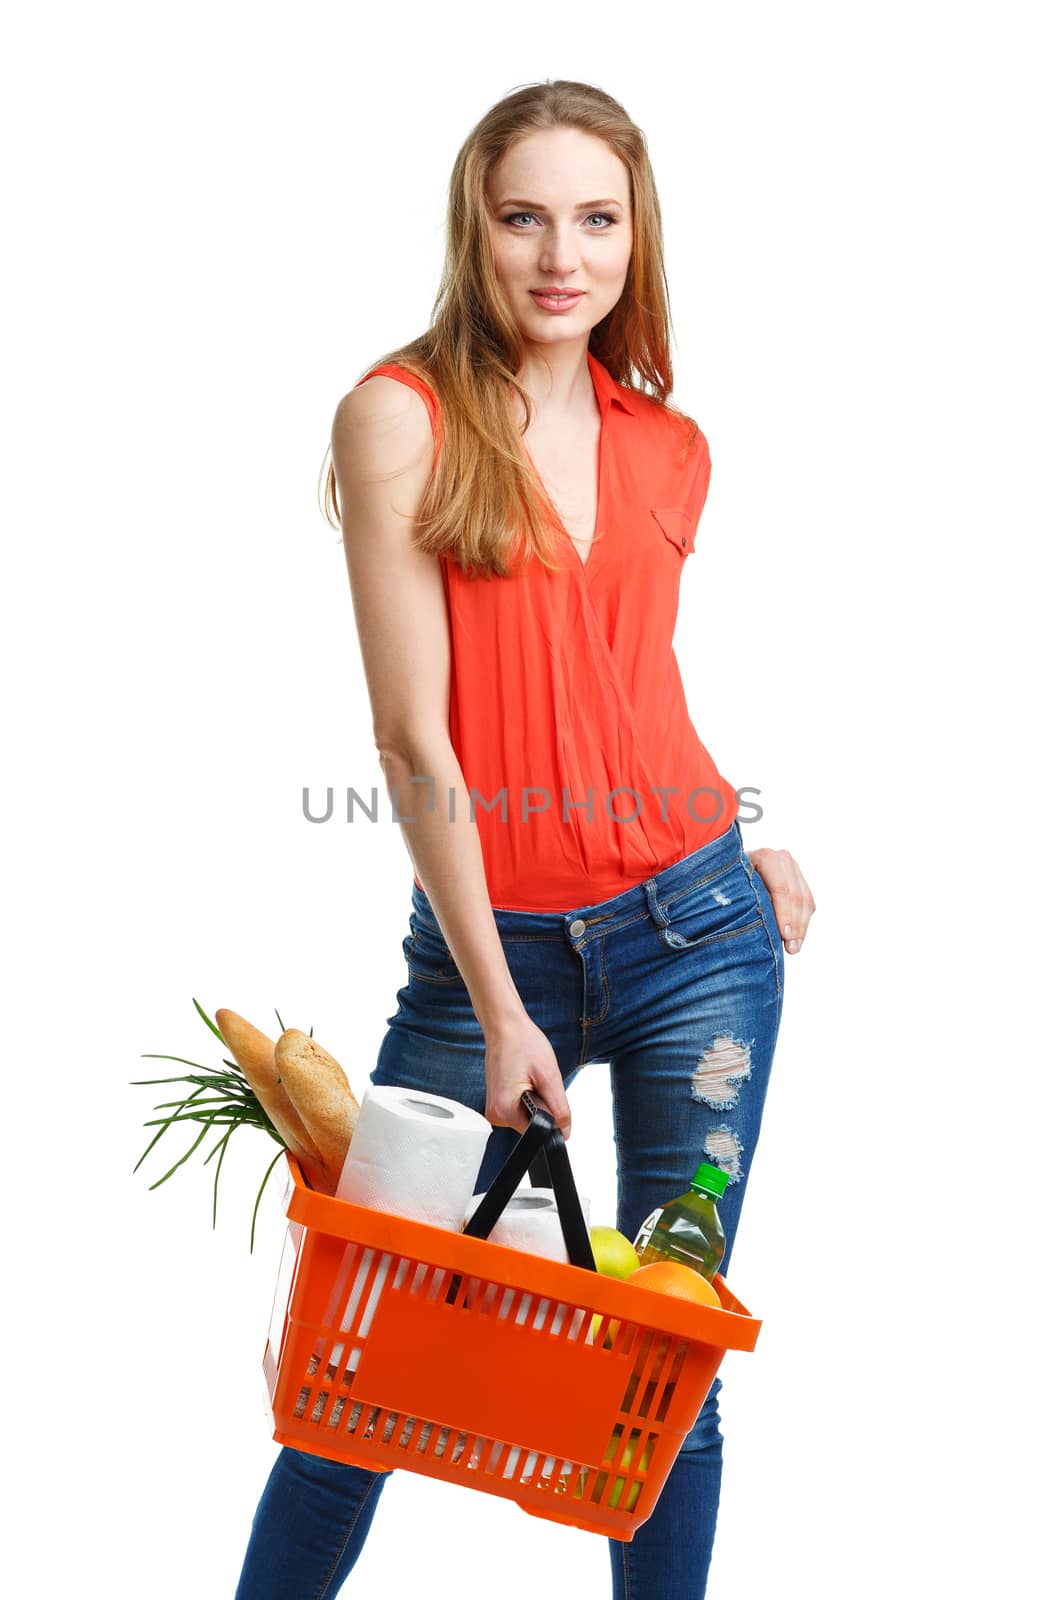 Happy young woman holding a basket full of healthy food. Shopping